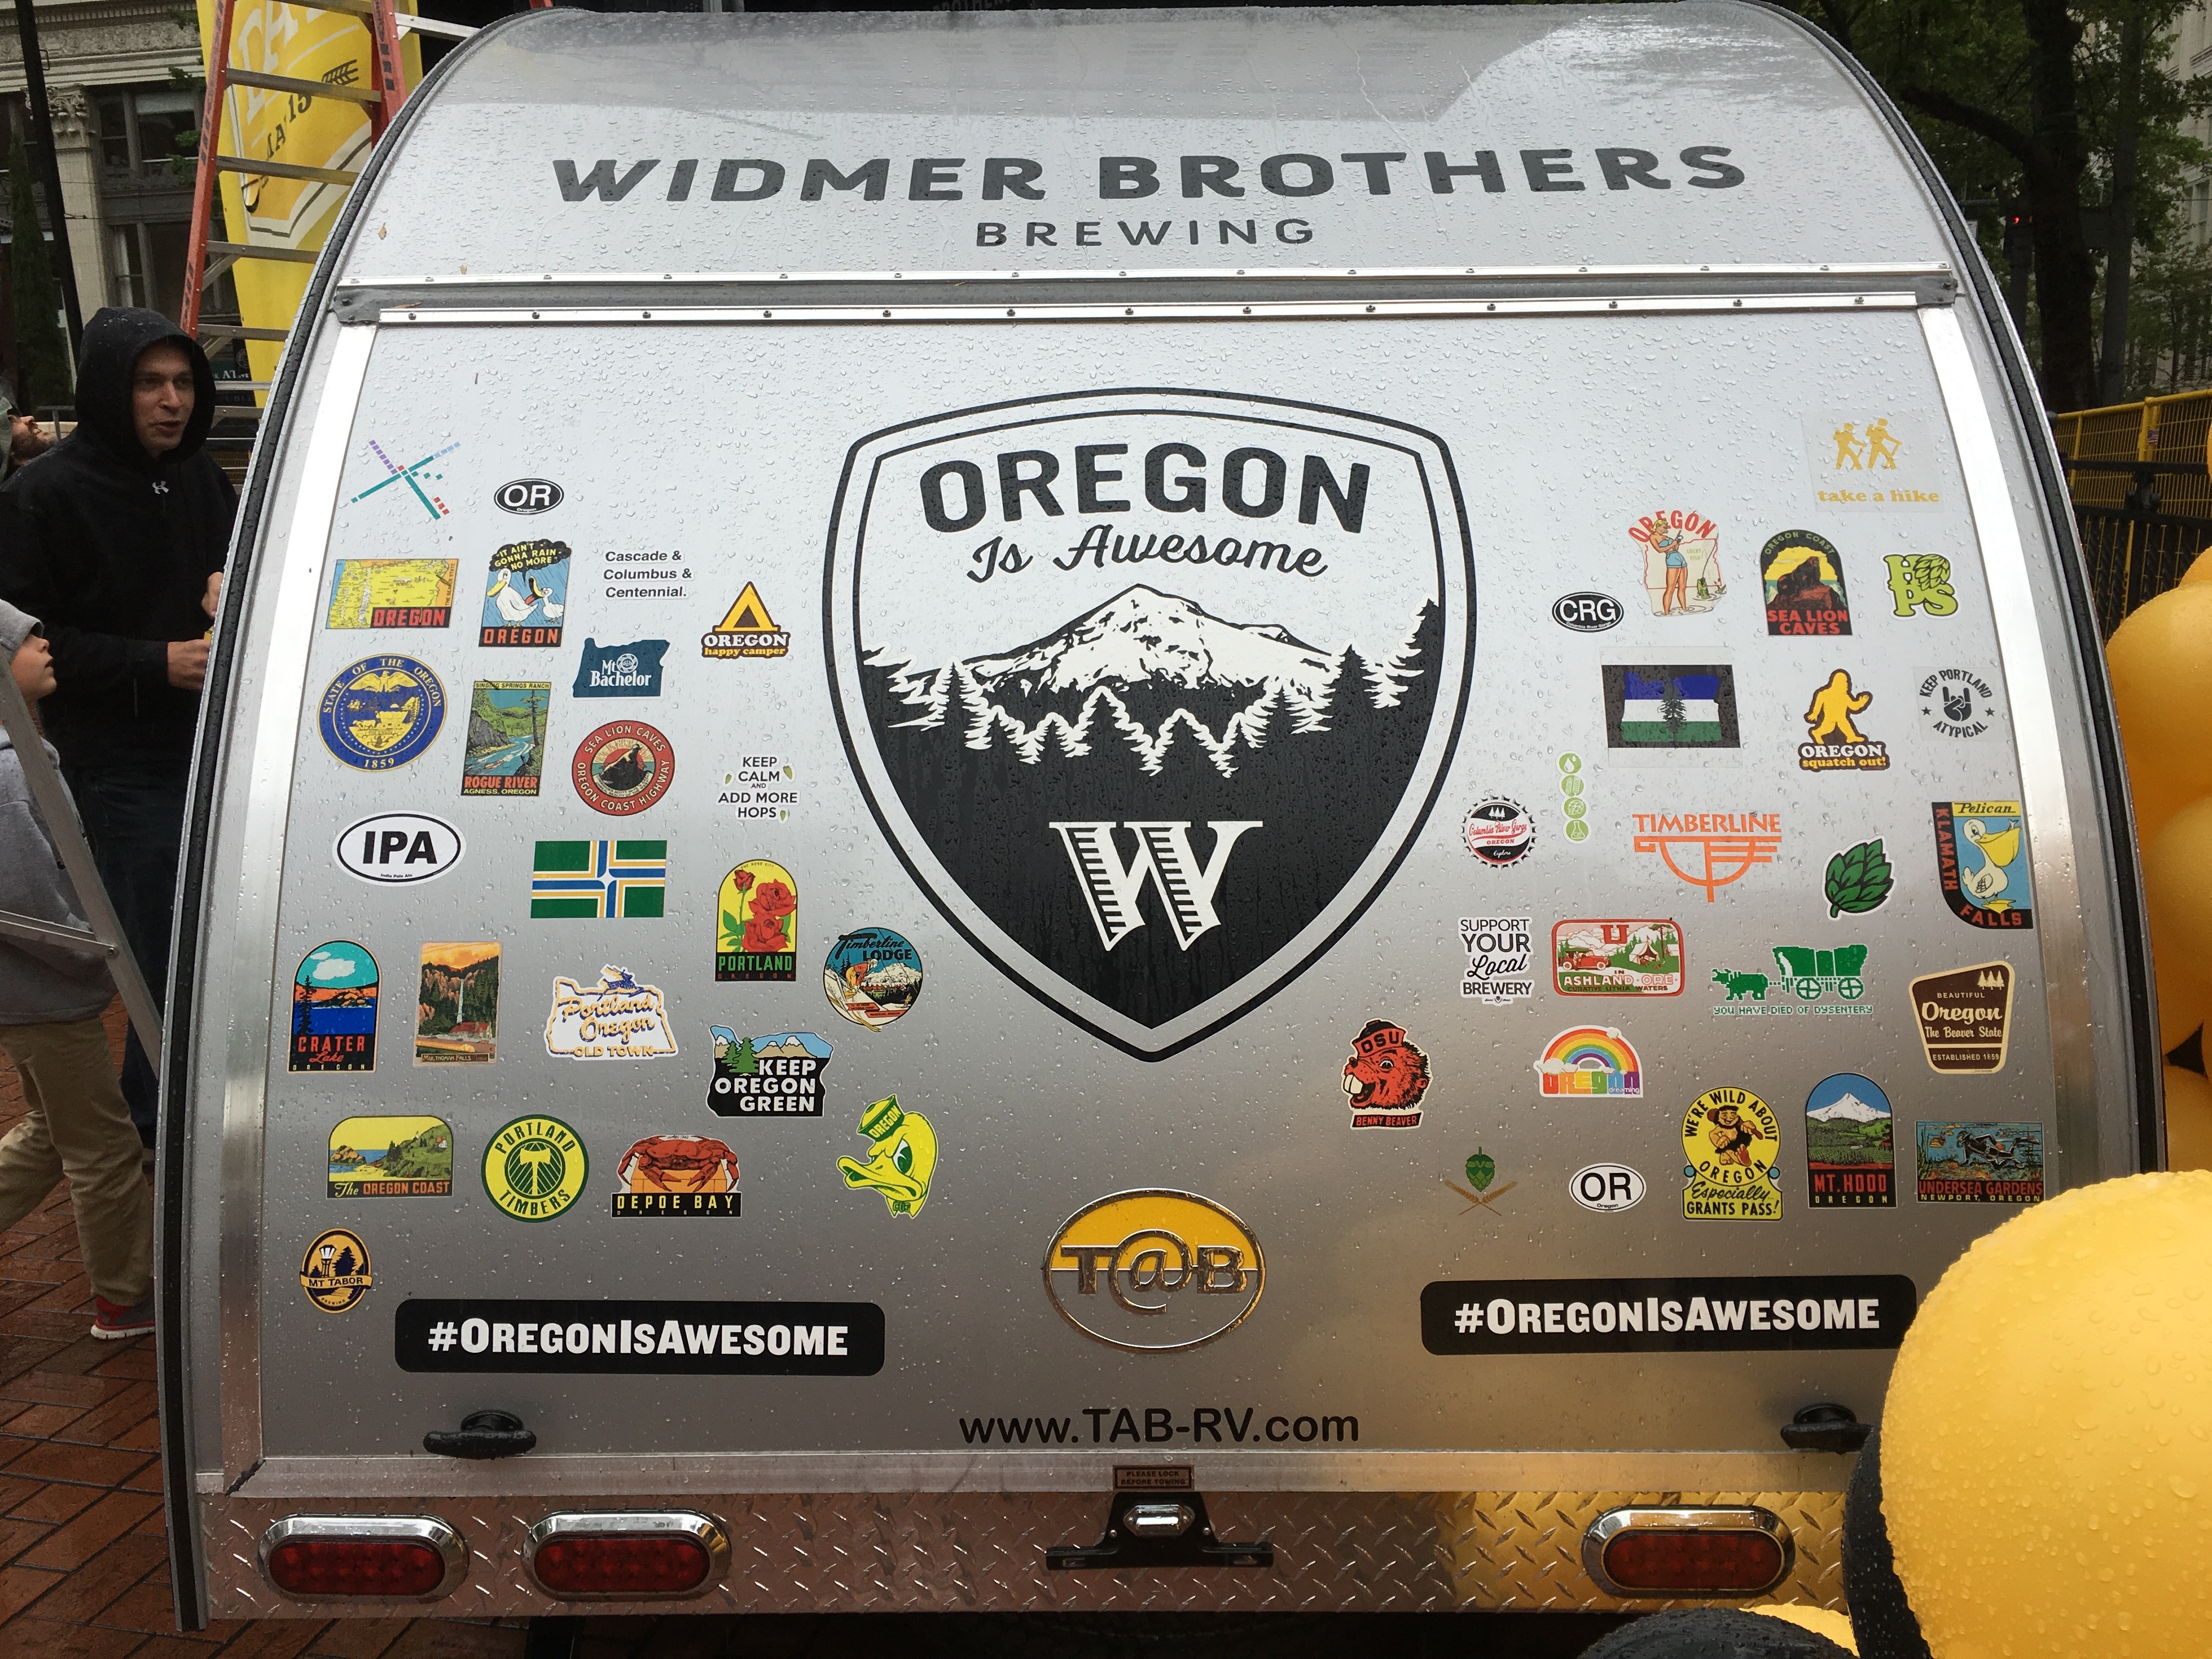 Widmer Brothers Brewing camper on display at Pioneer Courthouse Square during 2016 Hefe Day.